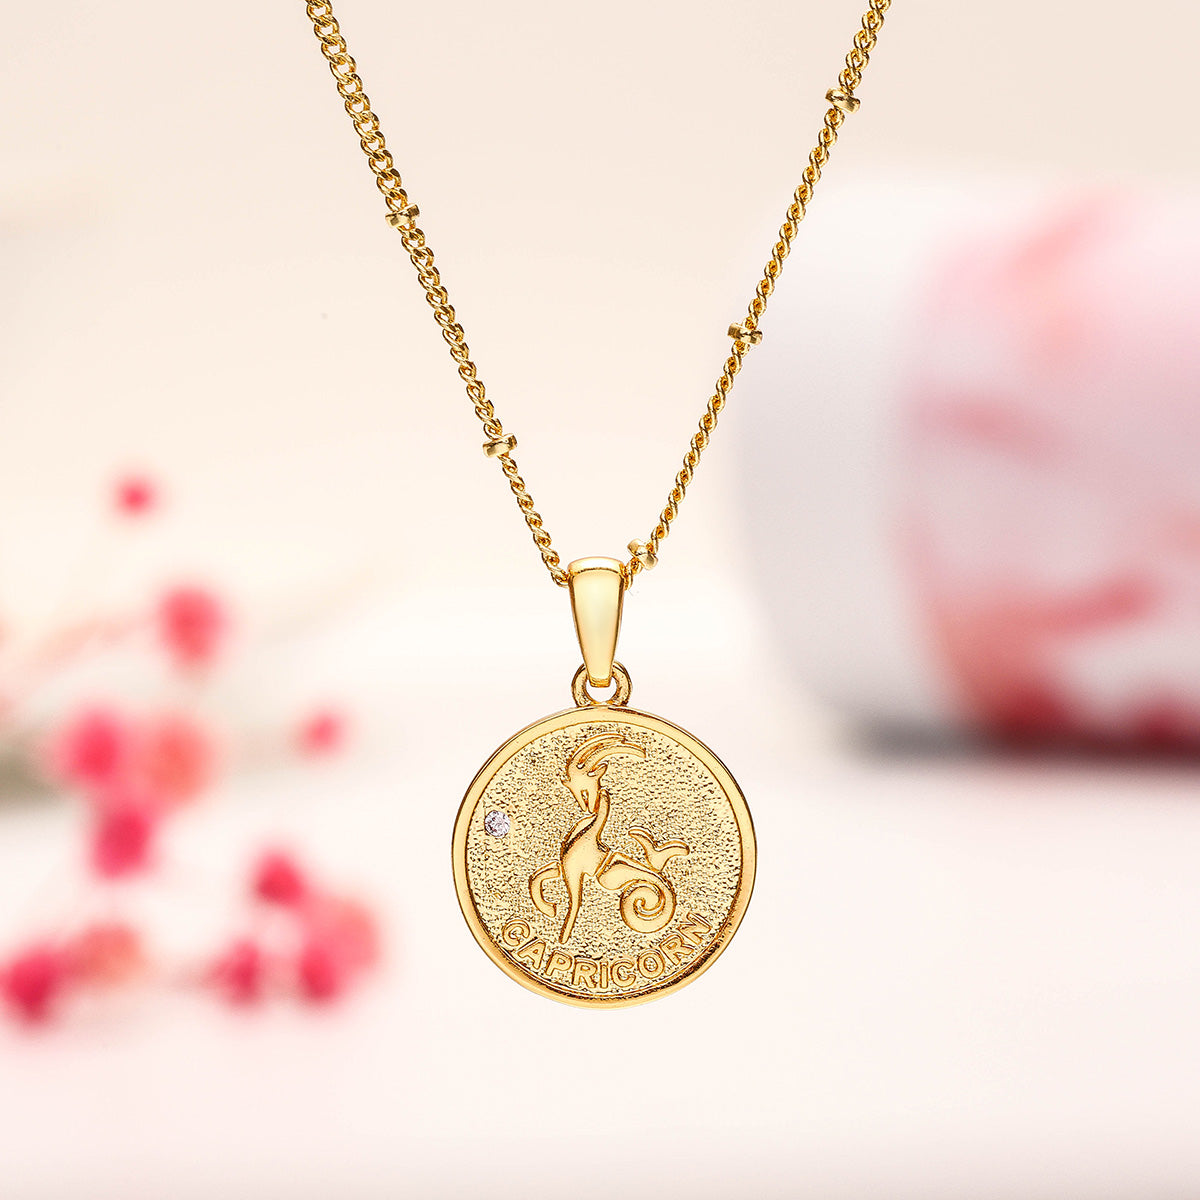 Capricorn Constellation Coin Pendant Astrology Necklace